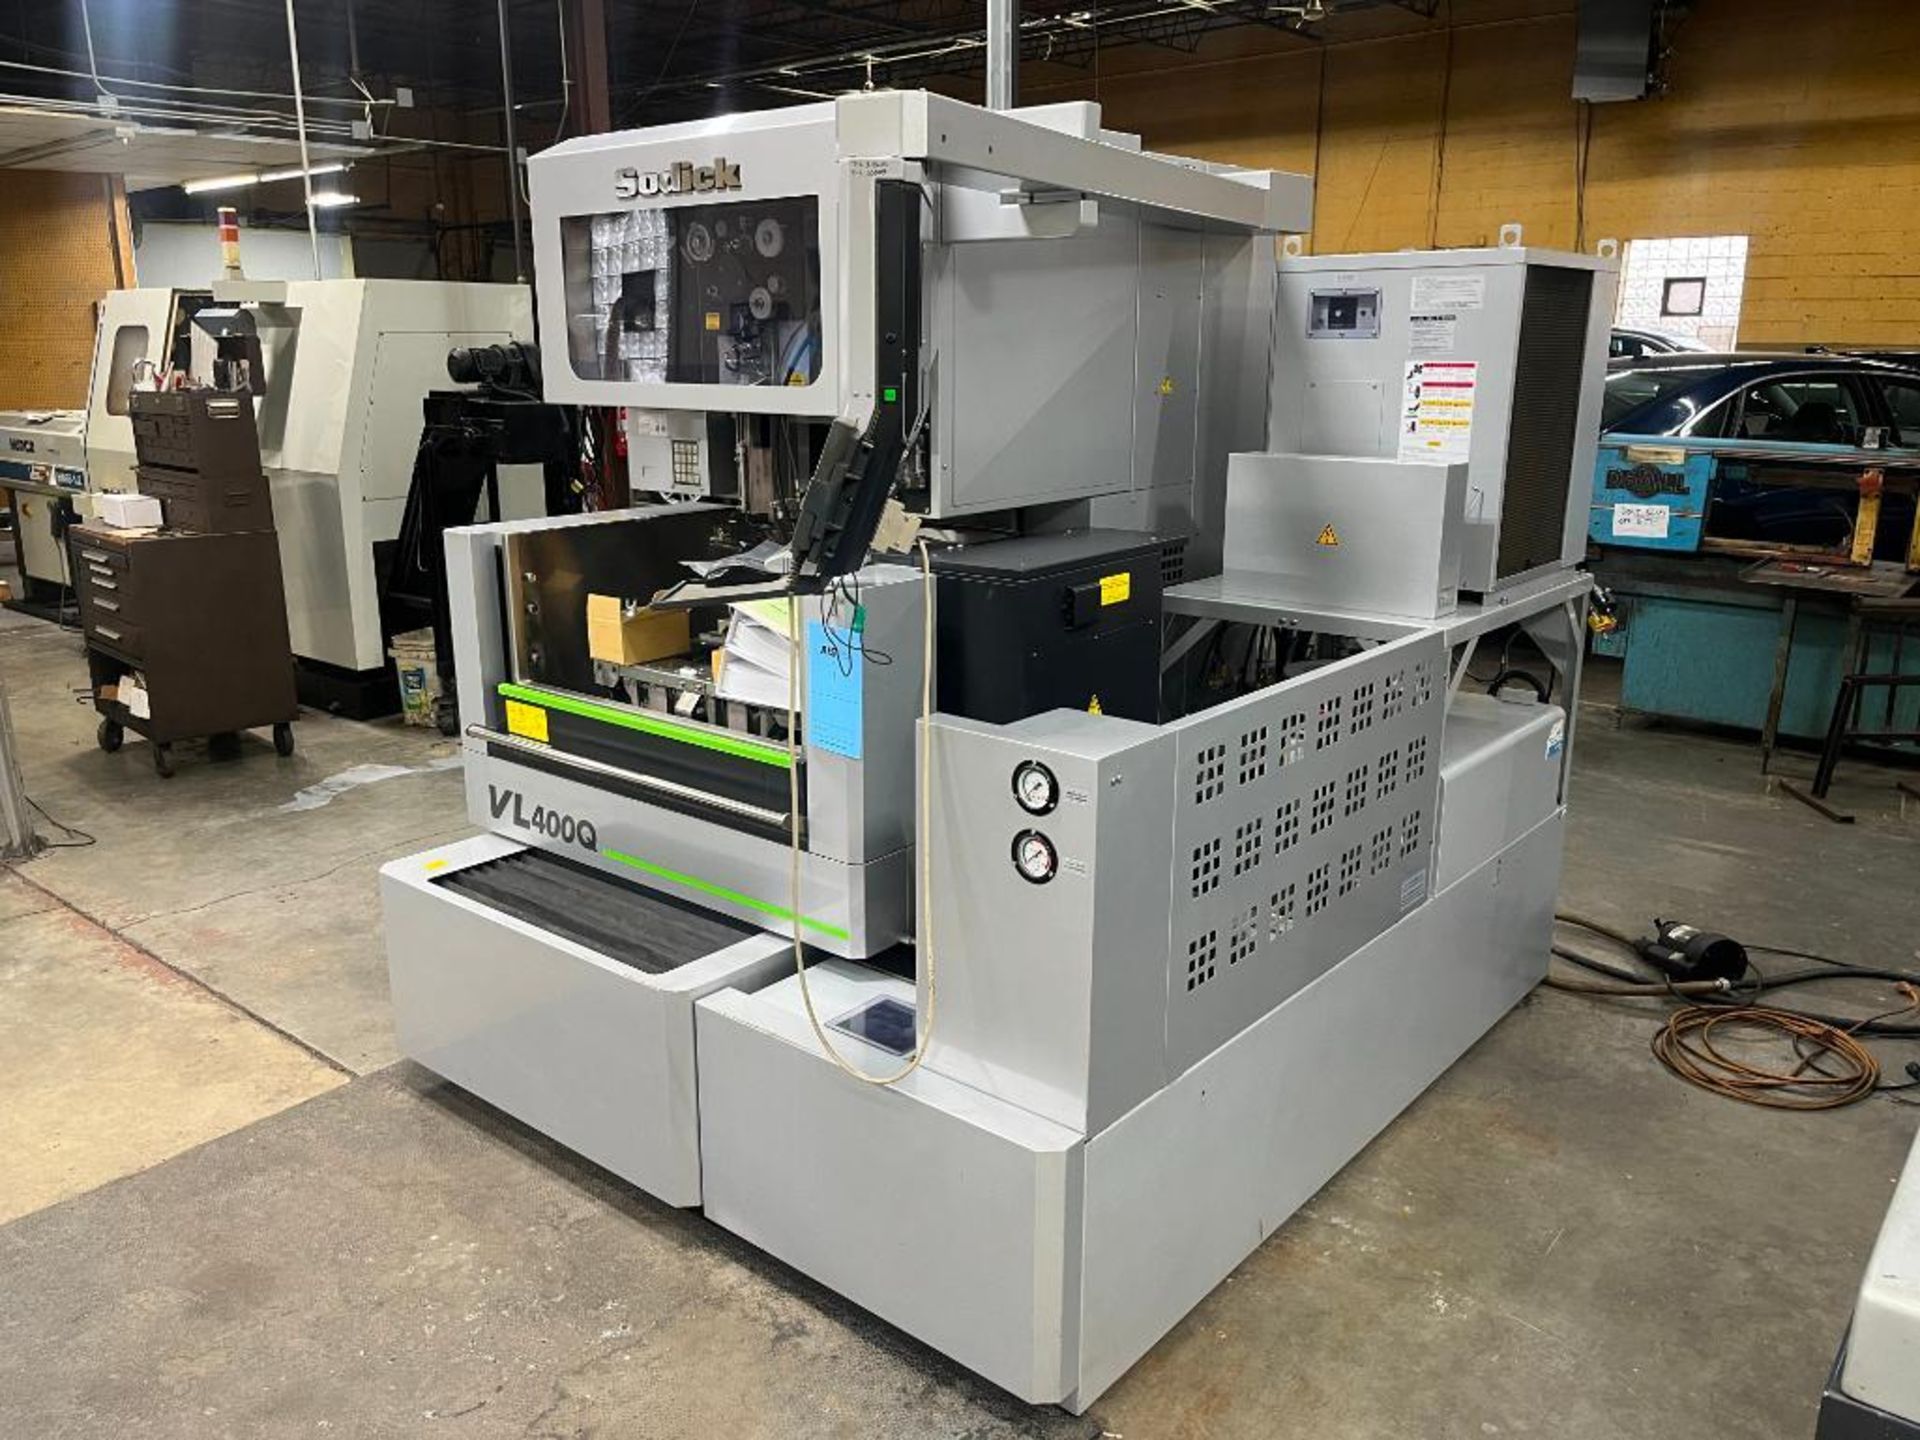 Sodick CNC Wire-Cut EDM Machine, Model VL400Q, S/N T0638 (2019) with Sodick LN2W CNC Control. With 8 - Image 2 of 41